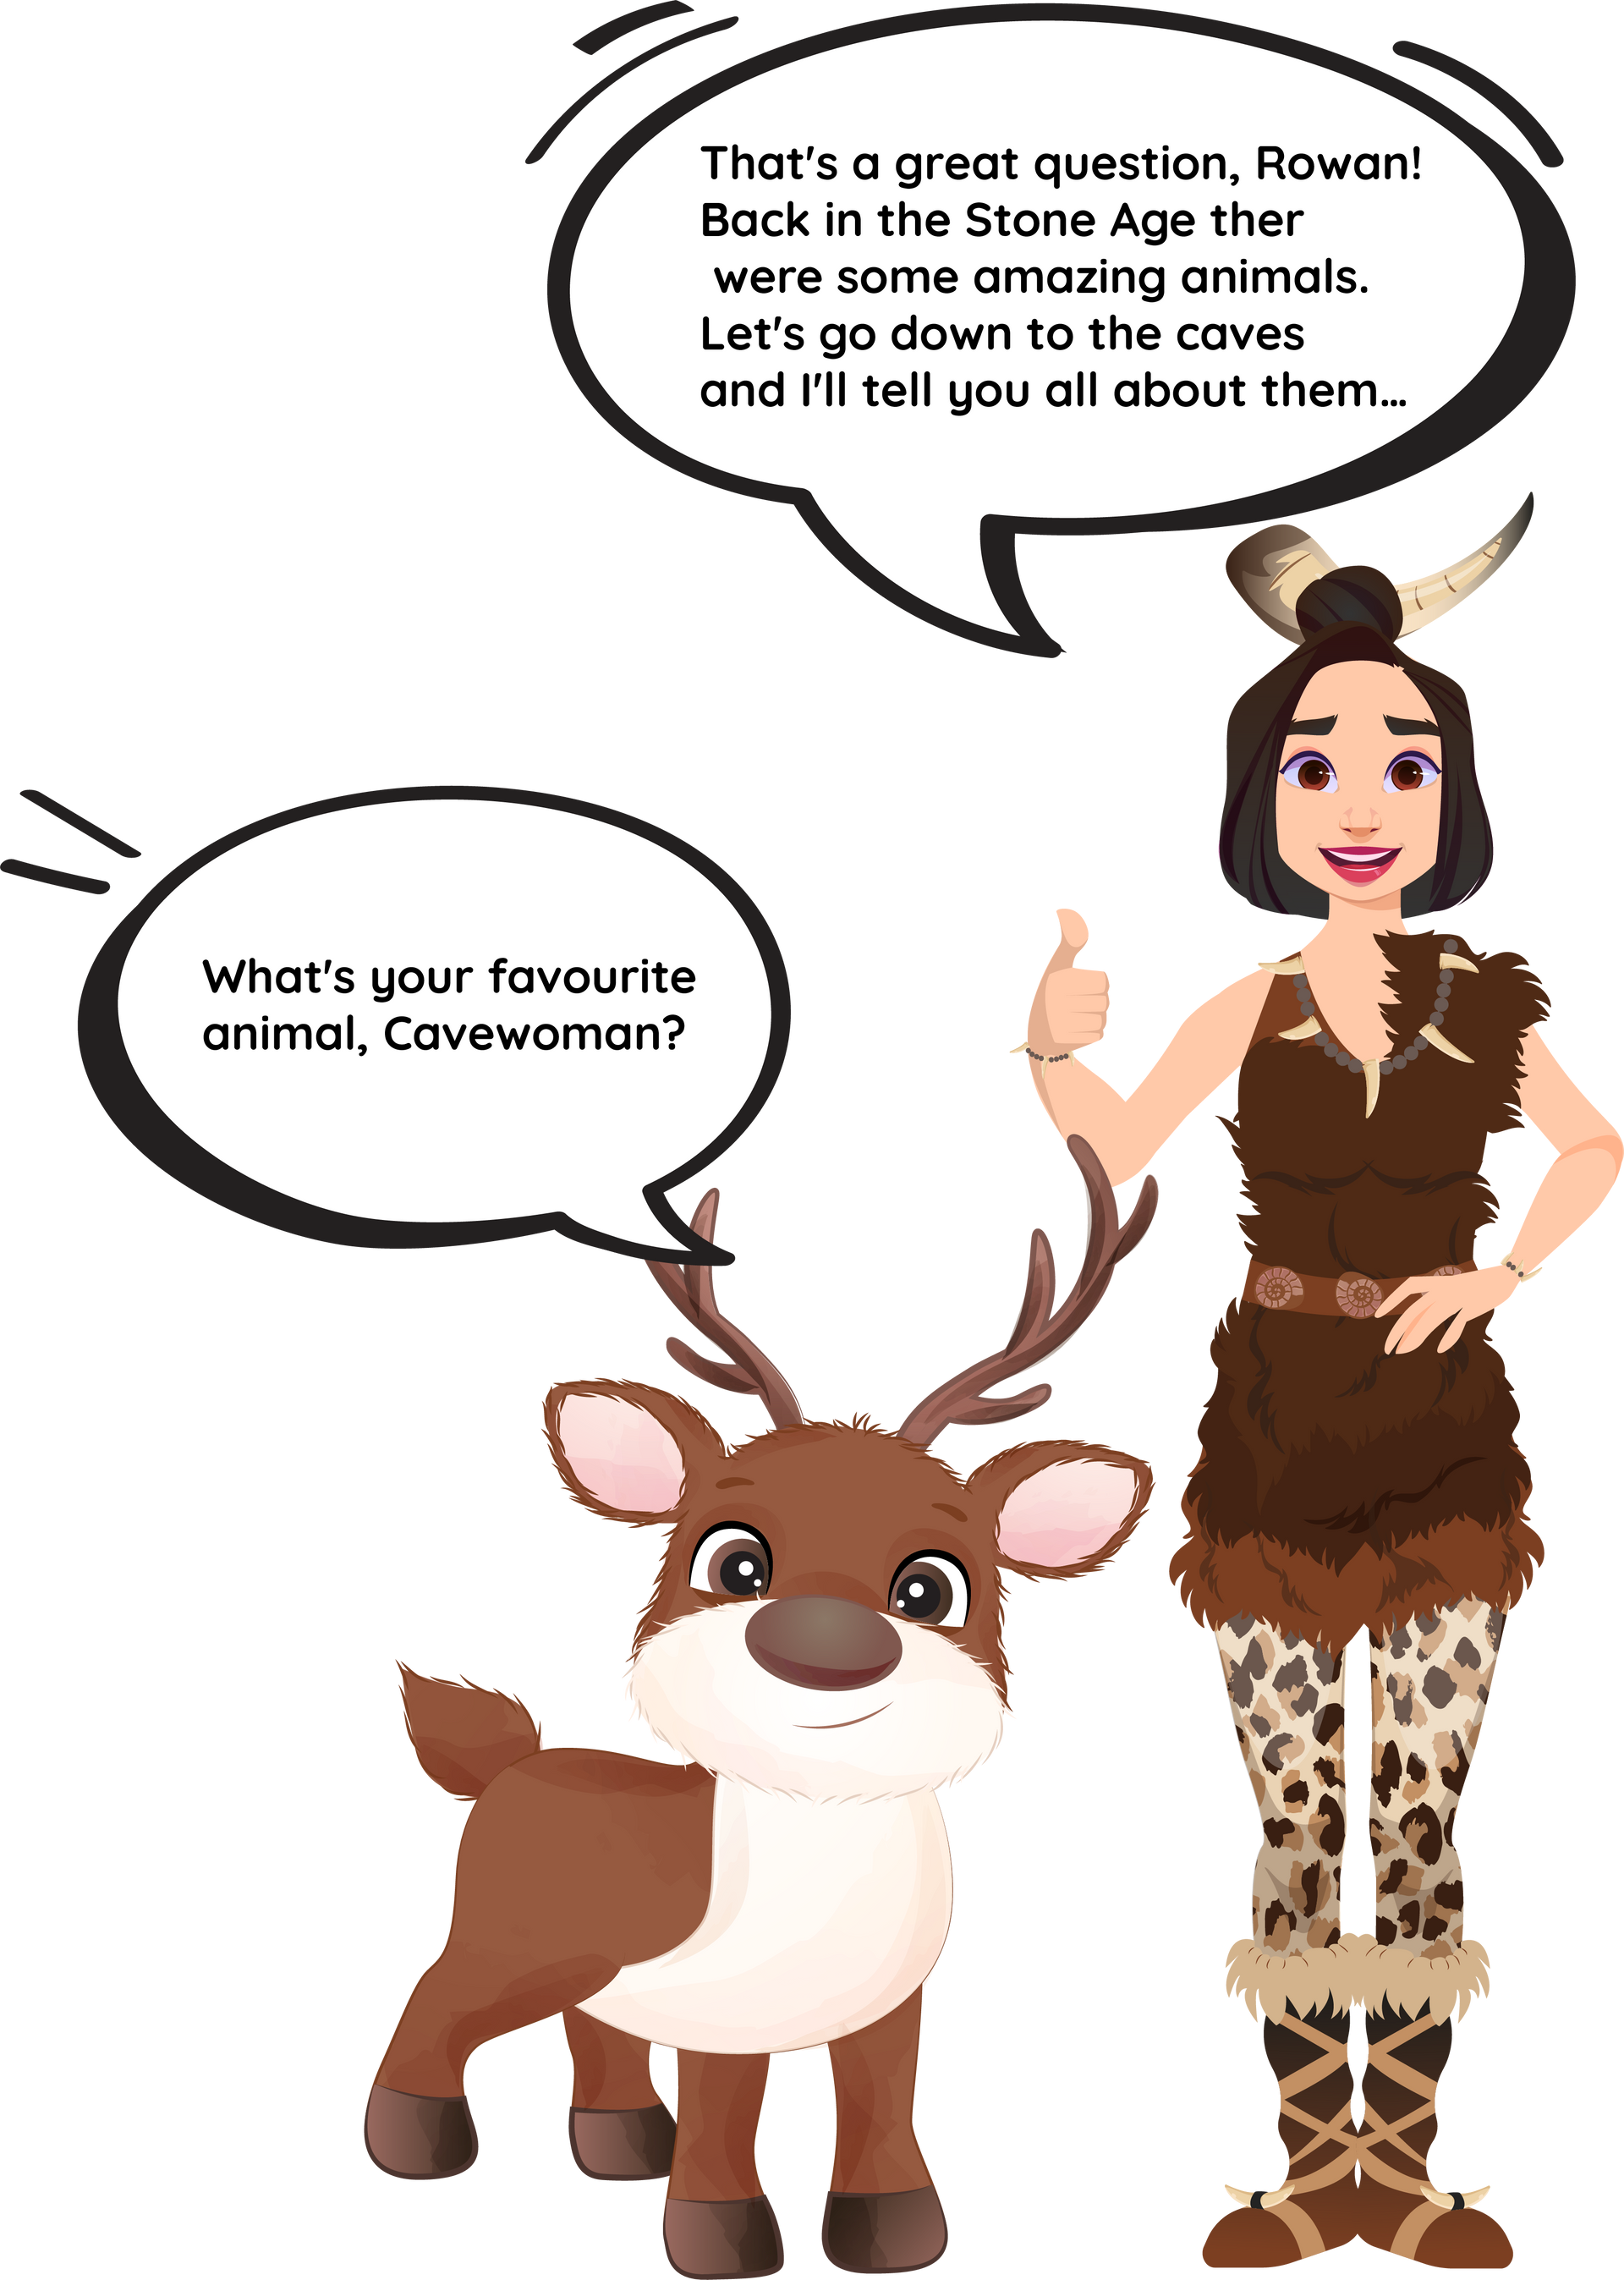 Rowan the reindeer asks cavewoman what her favourite animal is